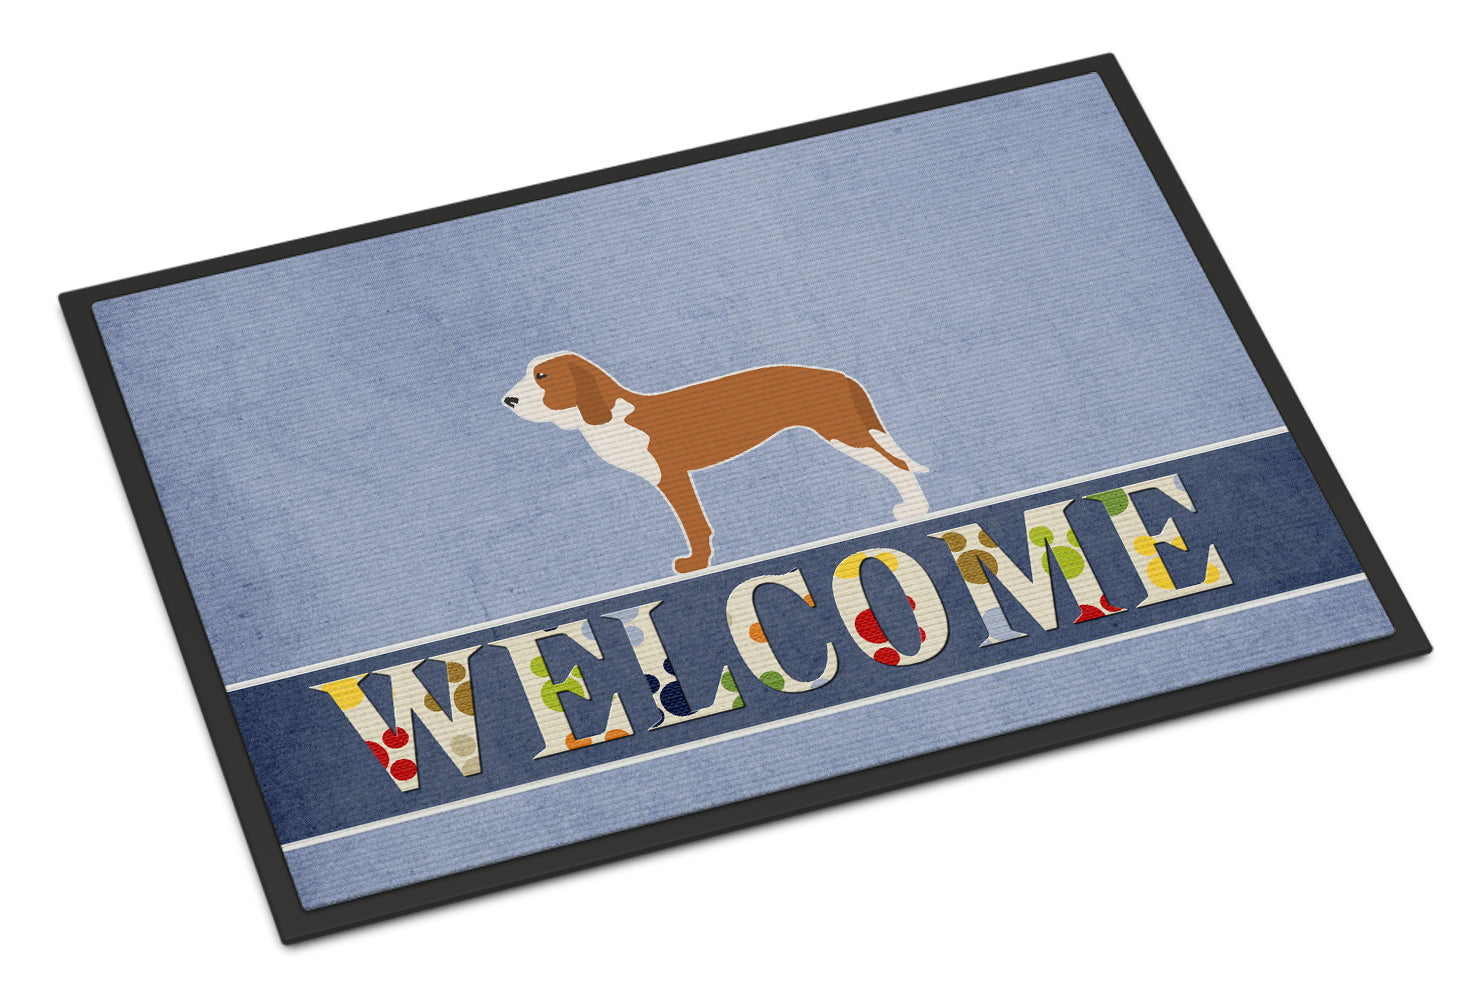 Spanish Hound Welcome Indoor or Outdoor Mat 18x27 BB5495MAT - the-store.com